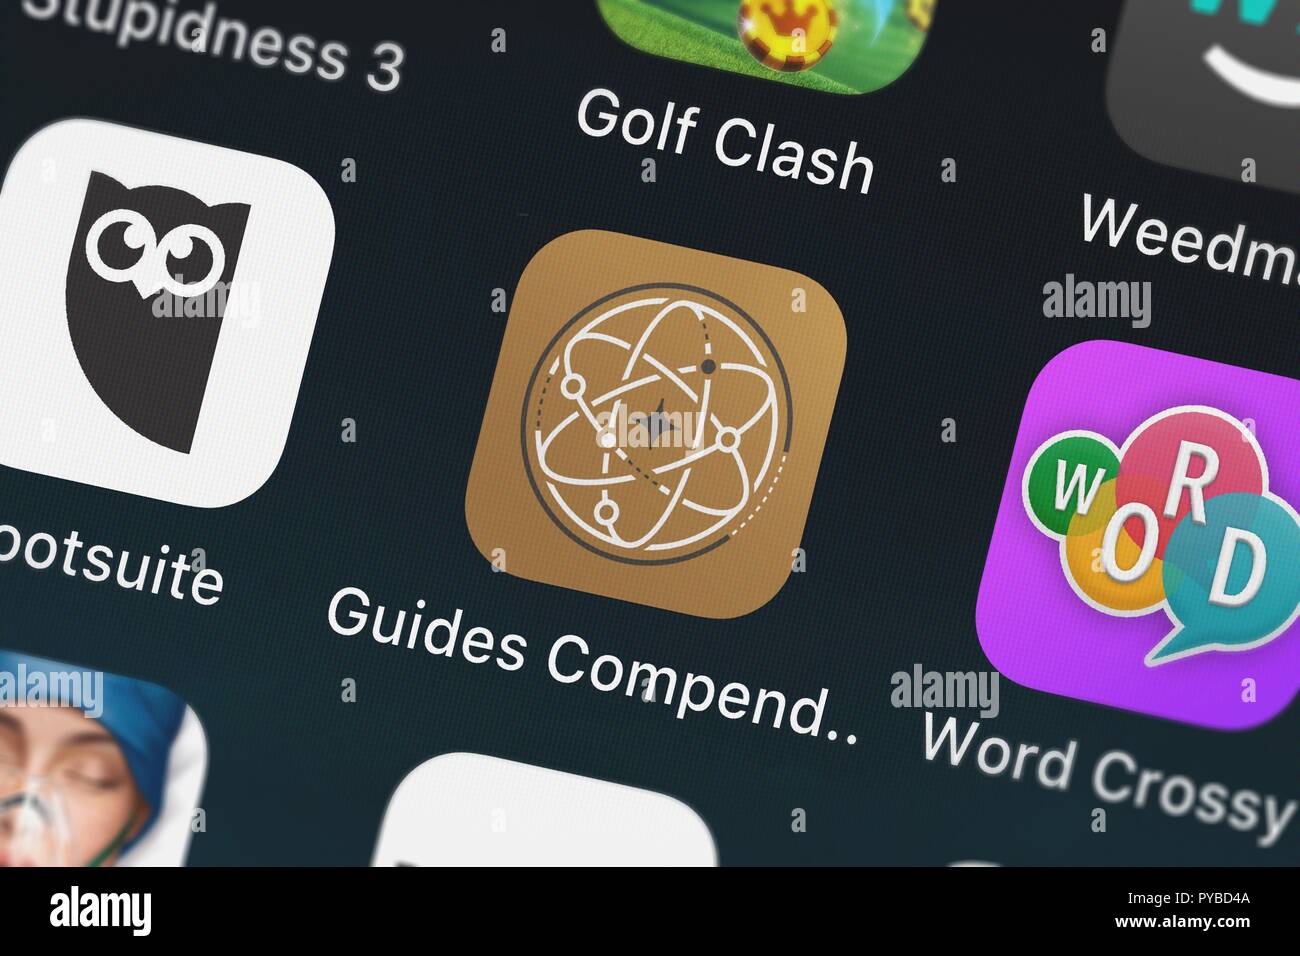 London, United Kingdom - October 26, 2018: Screenshot of the The Guides Compendium mobile app from RosiMosi LLC icon on an iPhone. Stock Photo